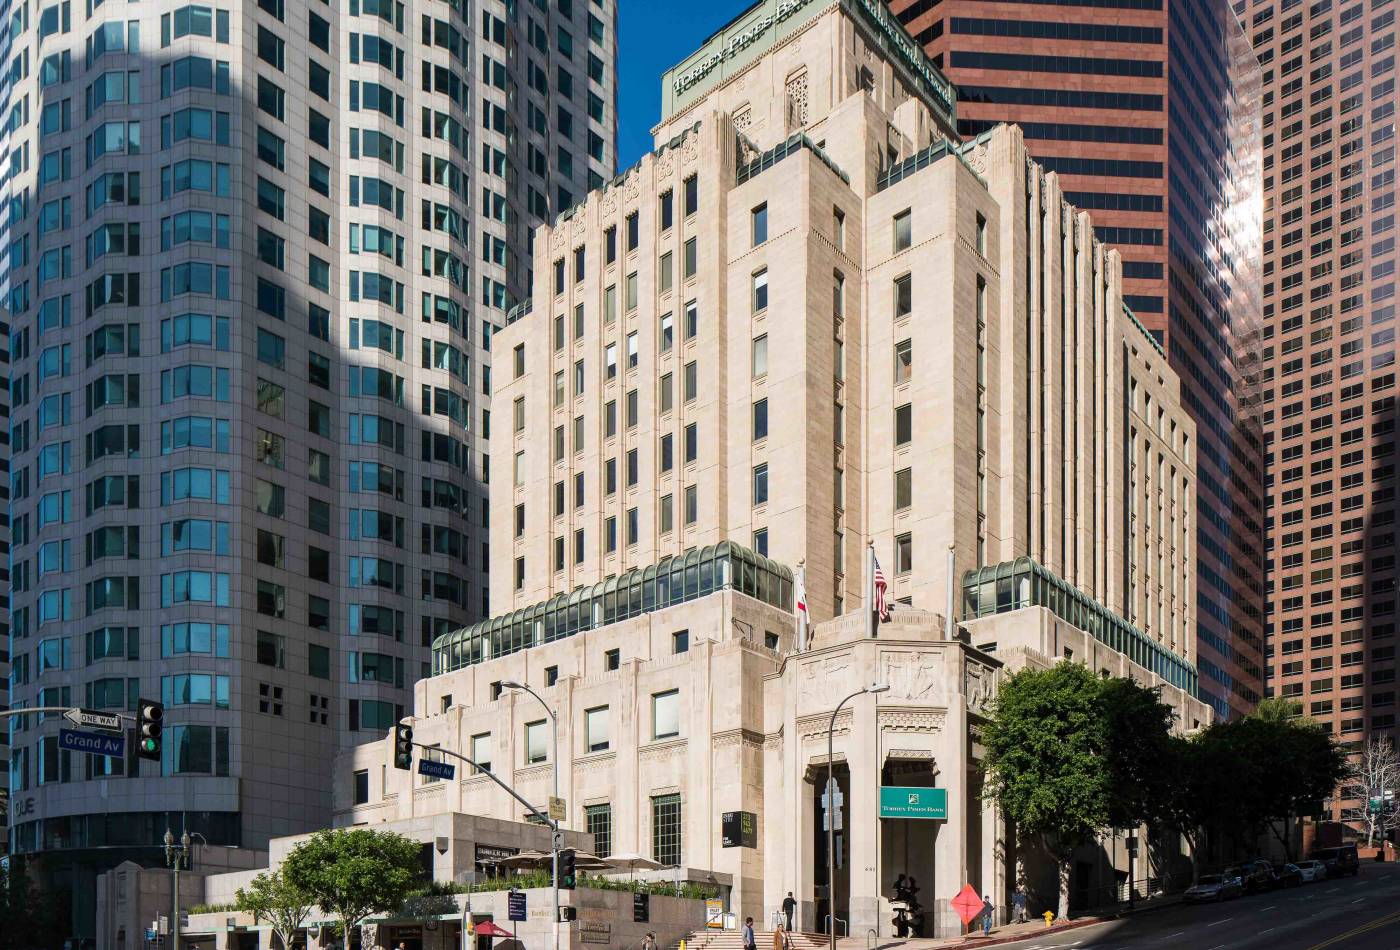 Located across from the Central Library in downtown Los Angeles, the Art Deco tower now known as The CalEdison DTLA has undergone an extensive set of improvements and technological upgrades as part of its conversion to creative office space. Our design team has led the redesign of the building’s interiors across multiple phases and contracts with different tenants. 